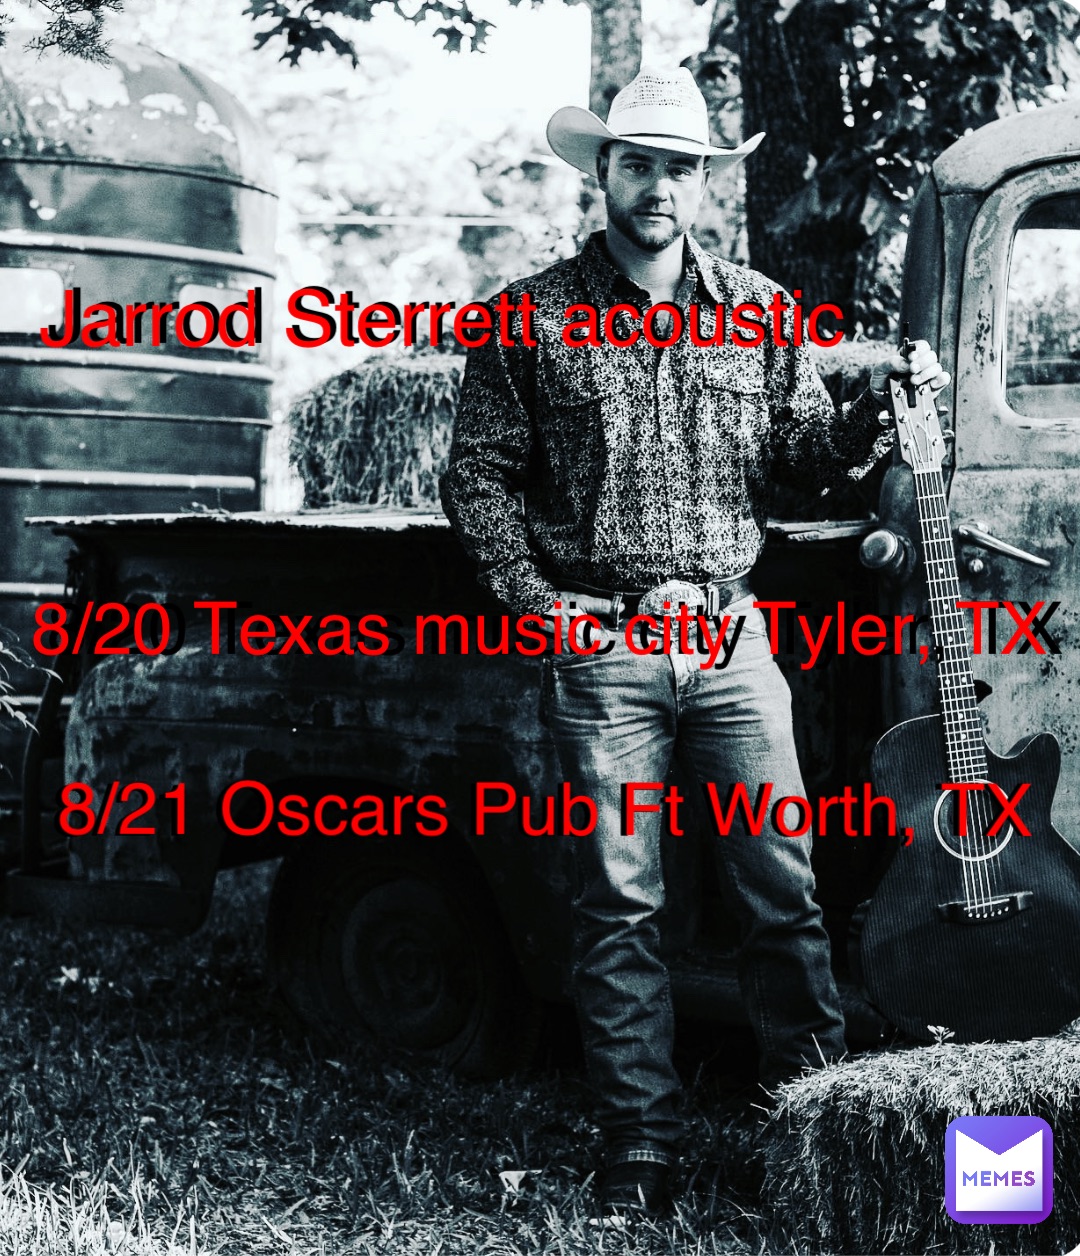 Double tap to edit 8/20 Texas music city Tyler, TX 8/20 Texas music city Tyler, TX Jarrod Sterrett acoustic Jarrod Sterrett acoustic 8/21 Oscars Pub Ft Worth, TX 8/21 Oscars Pub Ft Worth, TX